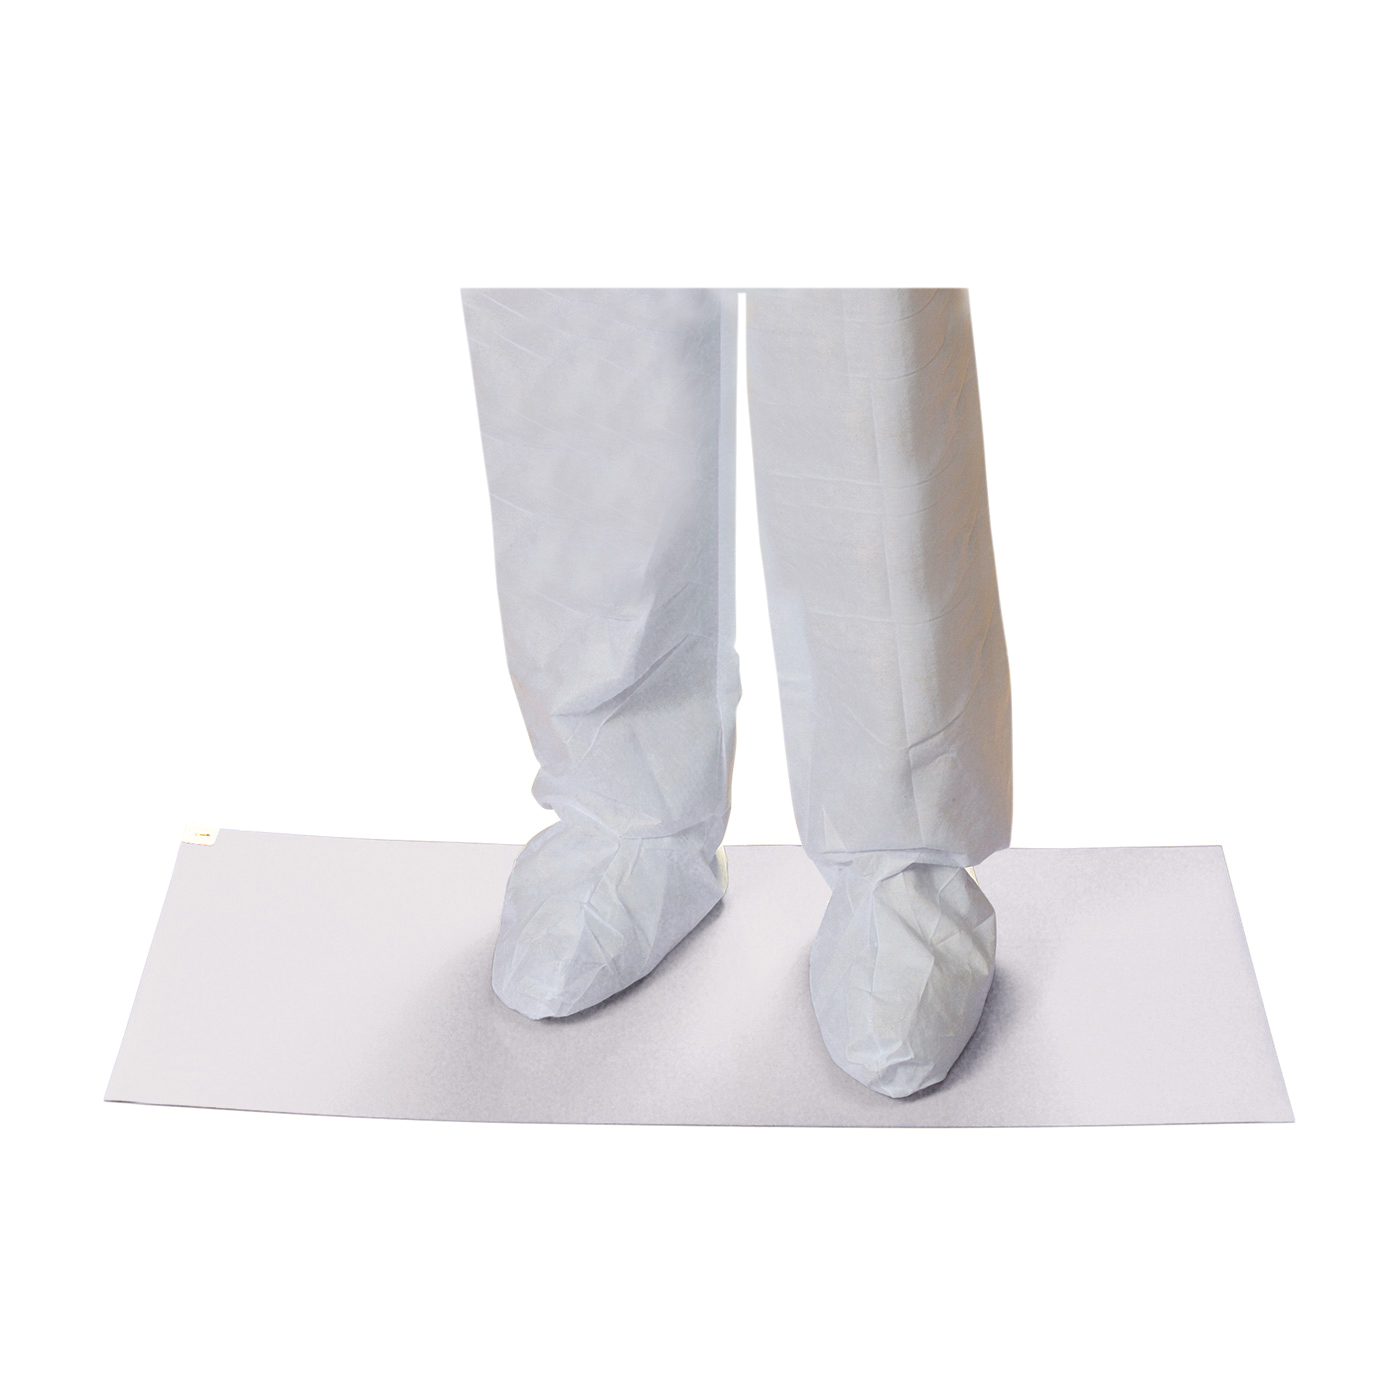 PIP® CleanTeam® 100-93-183638W Contamination Control Clean Room Mat, 36 in L x 18 in W x 0.05 mm THK, White, Polyethelene, 30 Sheets per Mat